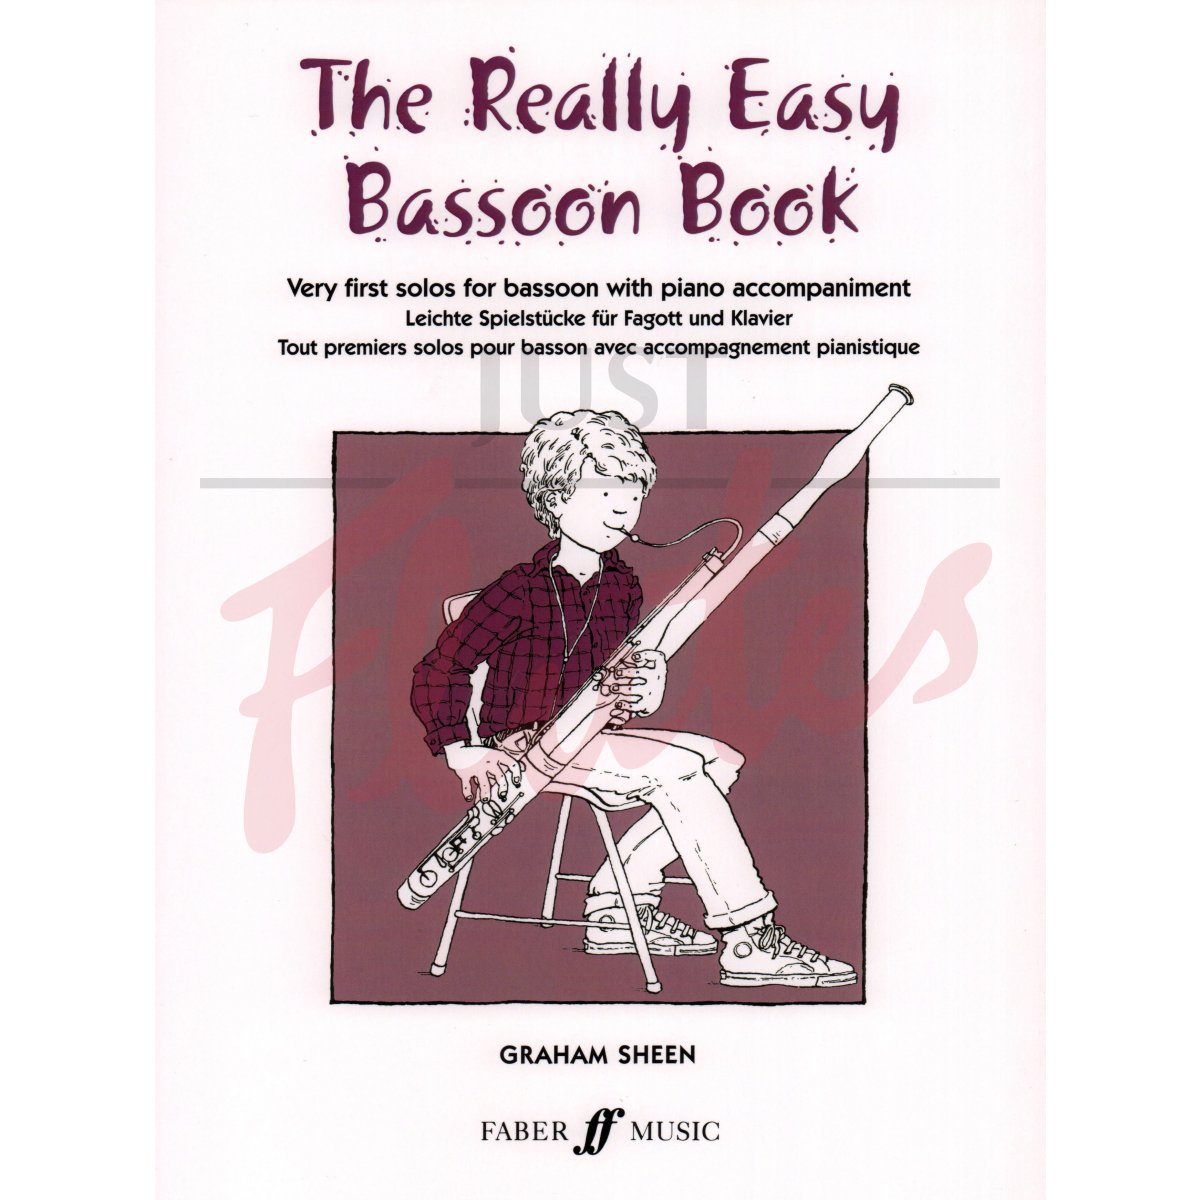 The Really Easy Bassoon Book for Bassoon and Piano